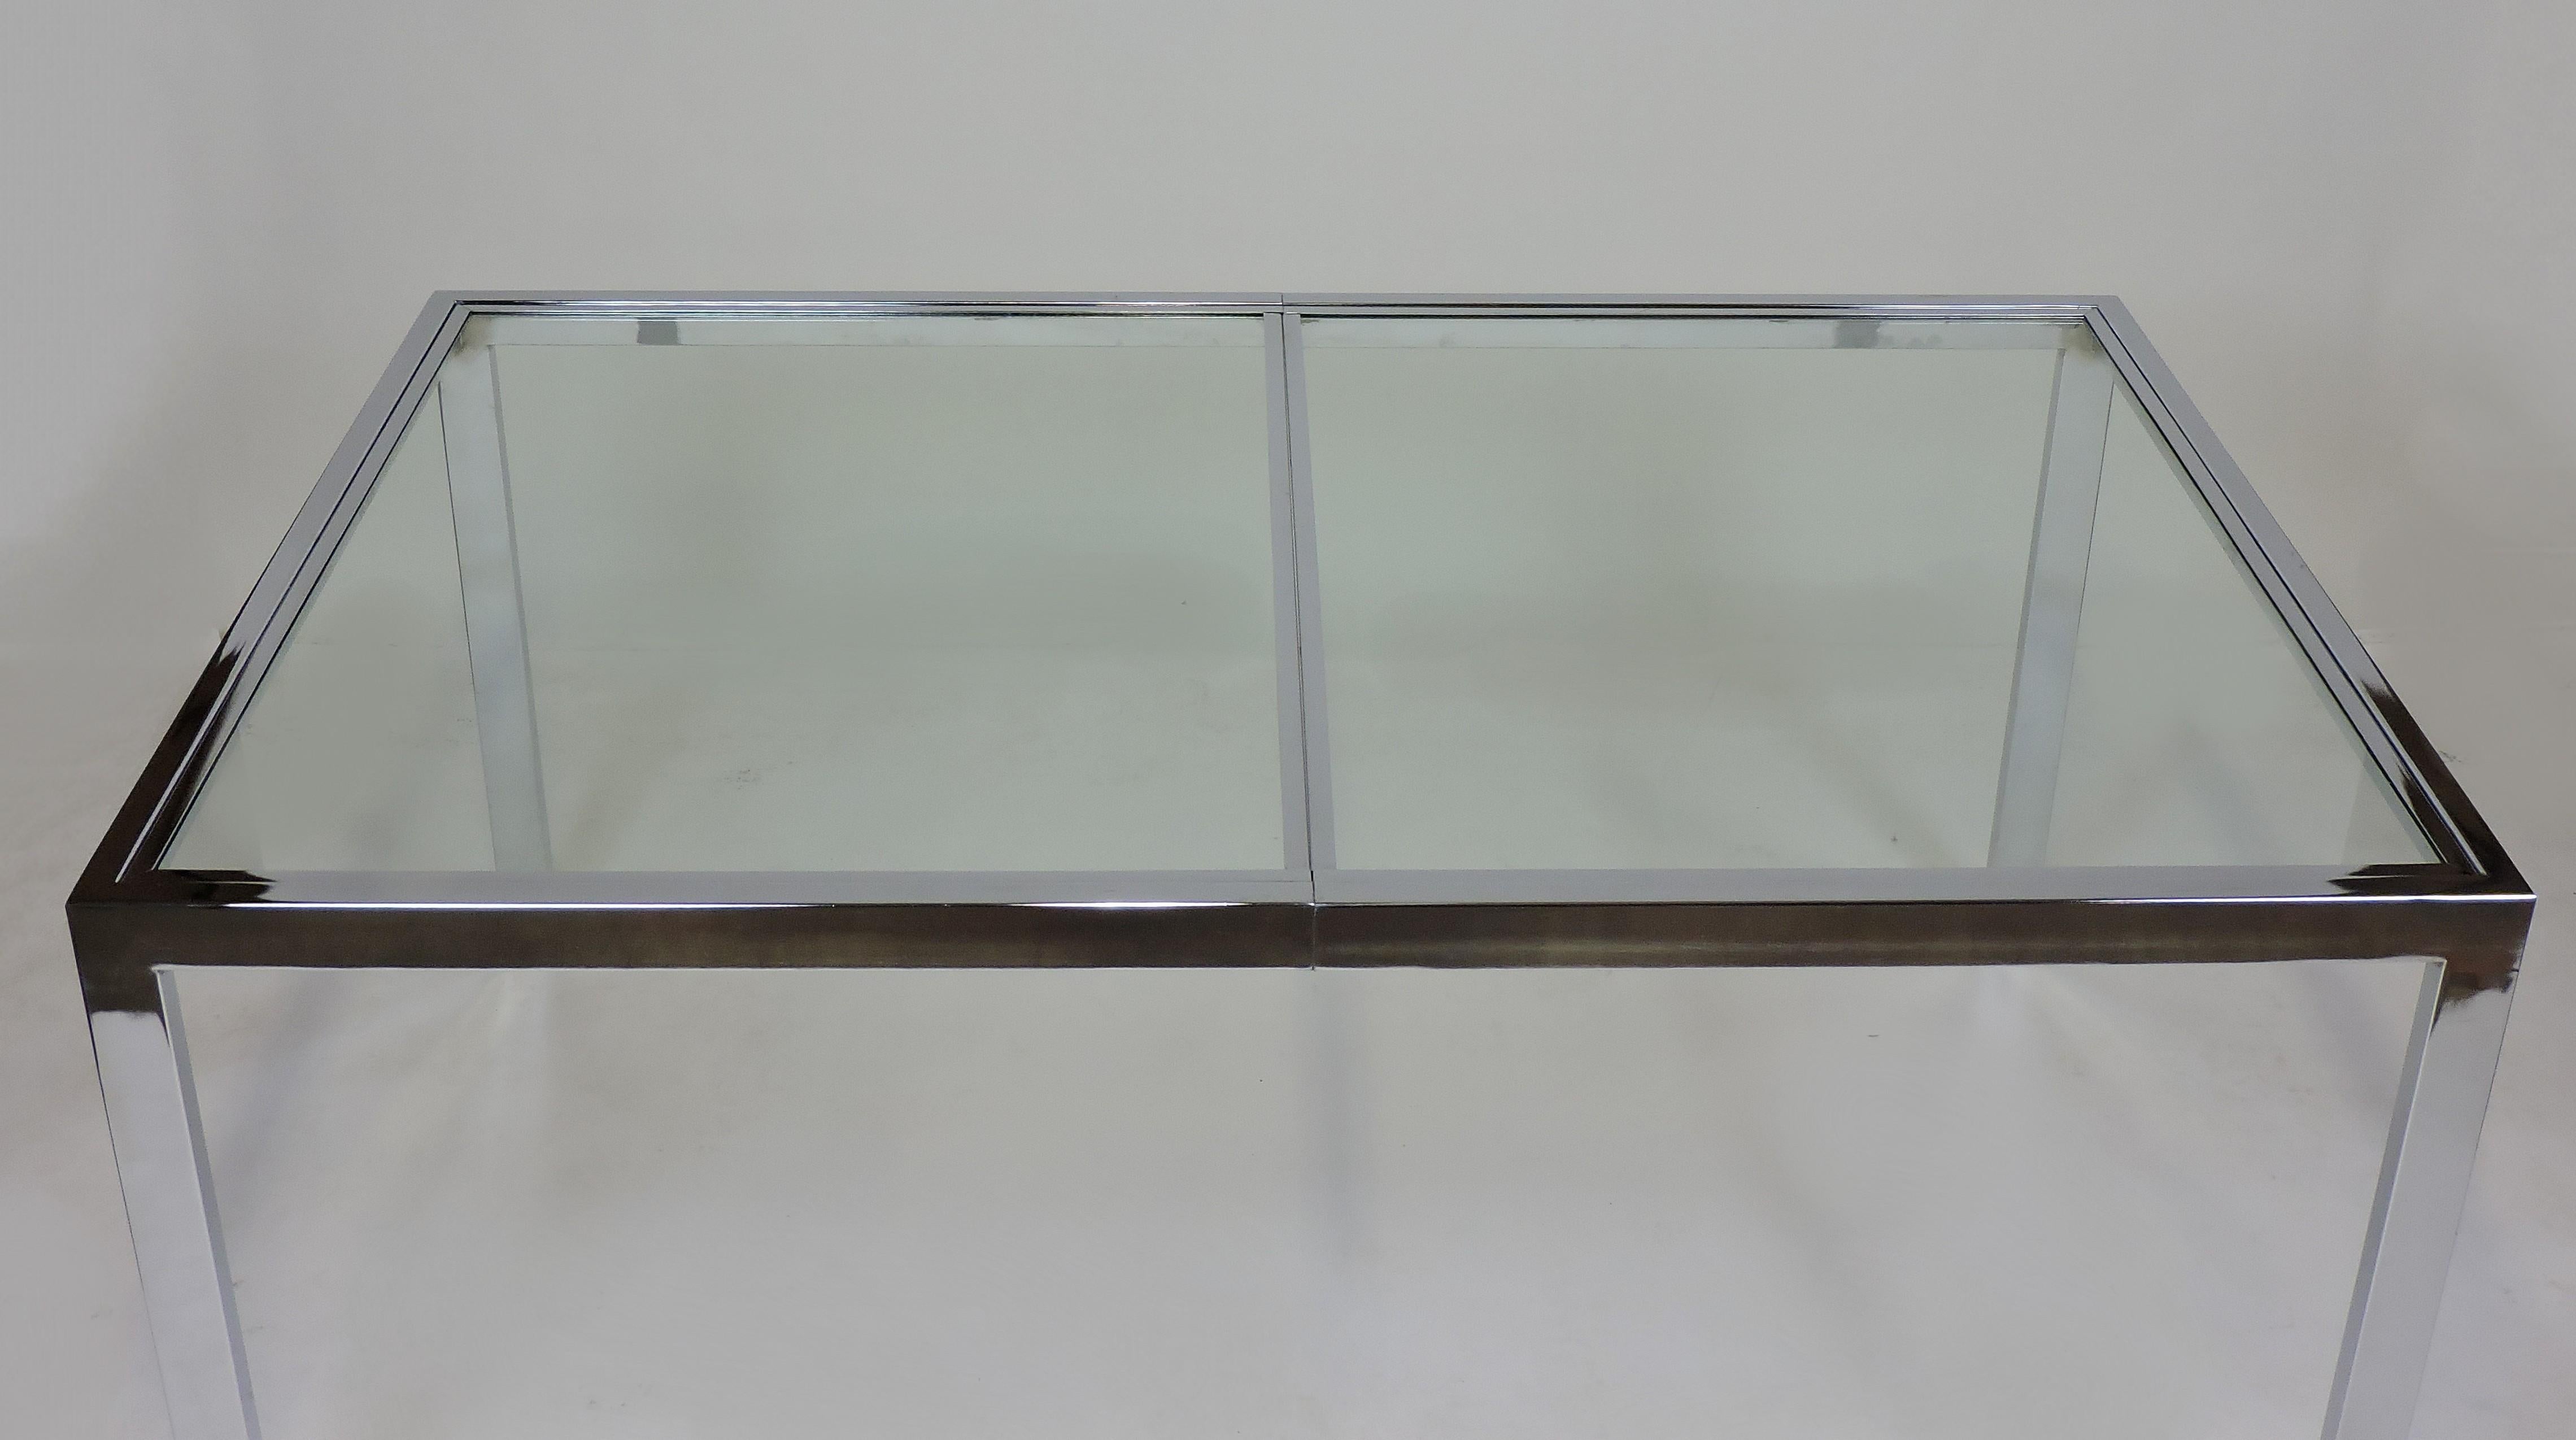 Late 20th Century Design Institute America DIA Mid-Century Modern Extendable Chrome Dining Table